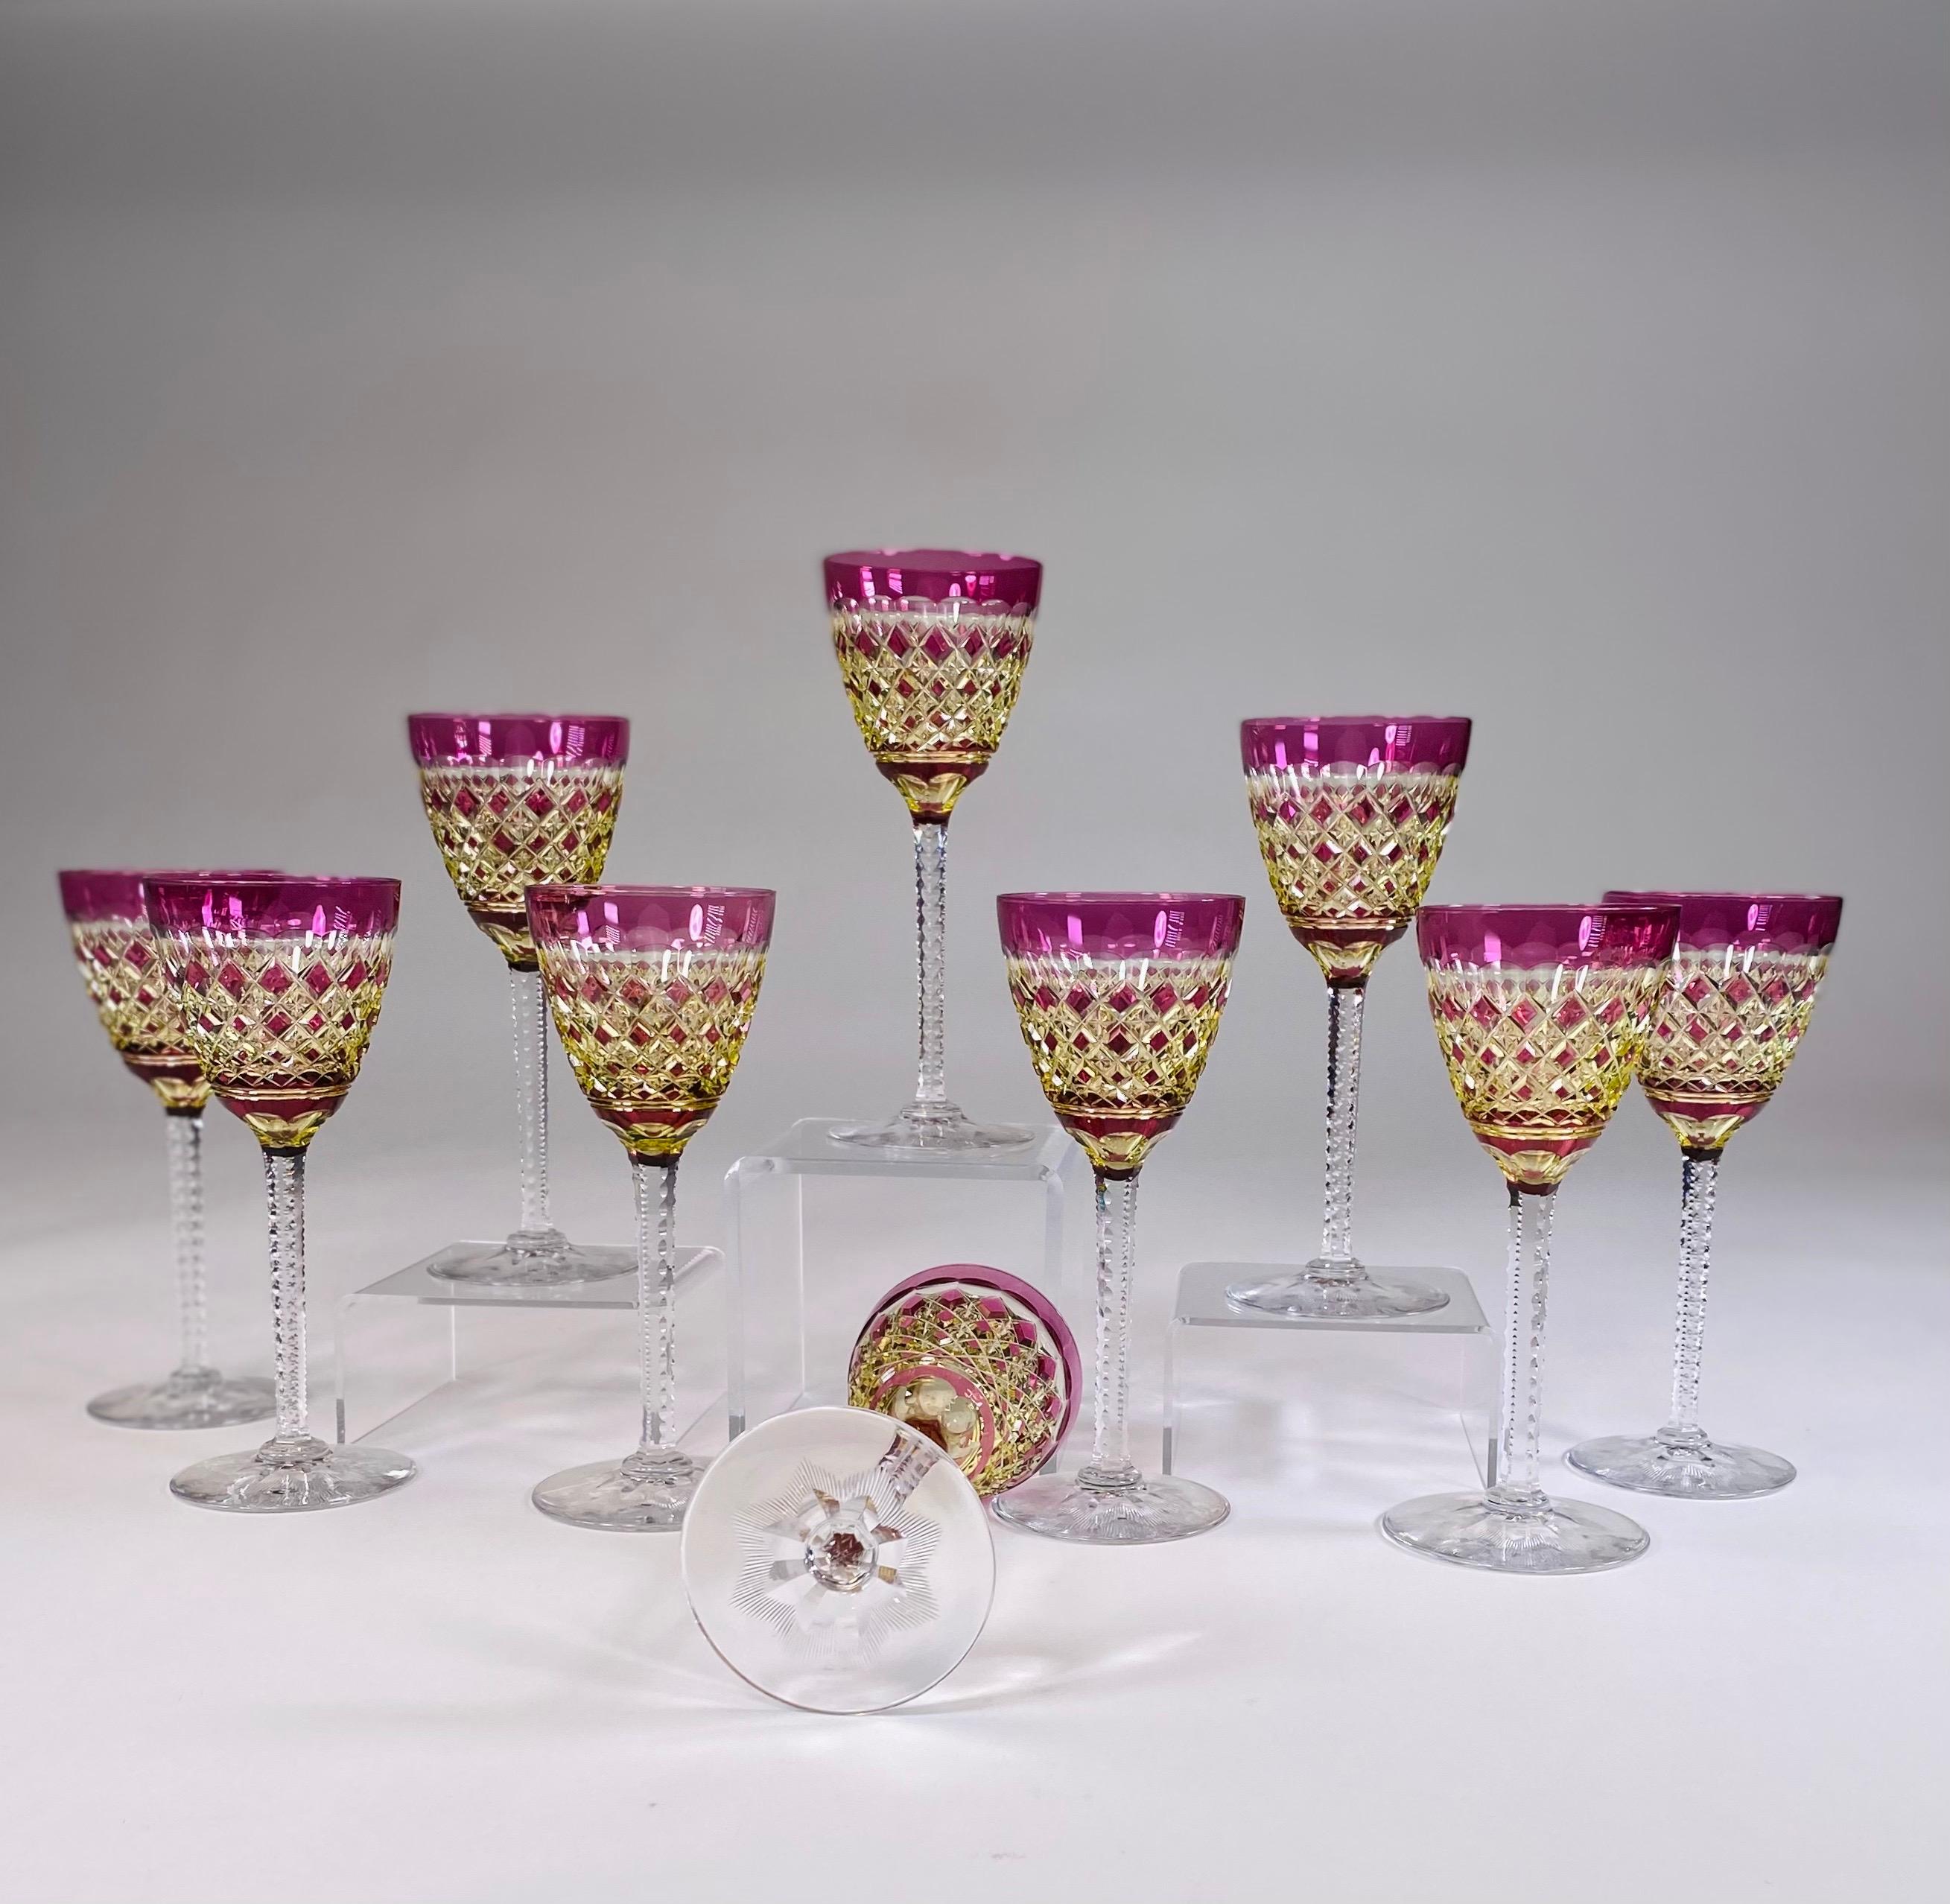 This is a rare combination of Val St. Lambert's finest workmanship. The tall elegant goblets are handblown crystal with Amethyst overlay cut to Chartreuse, an uncommon combination. These will be the focal point of your backbar or display.
The stem